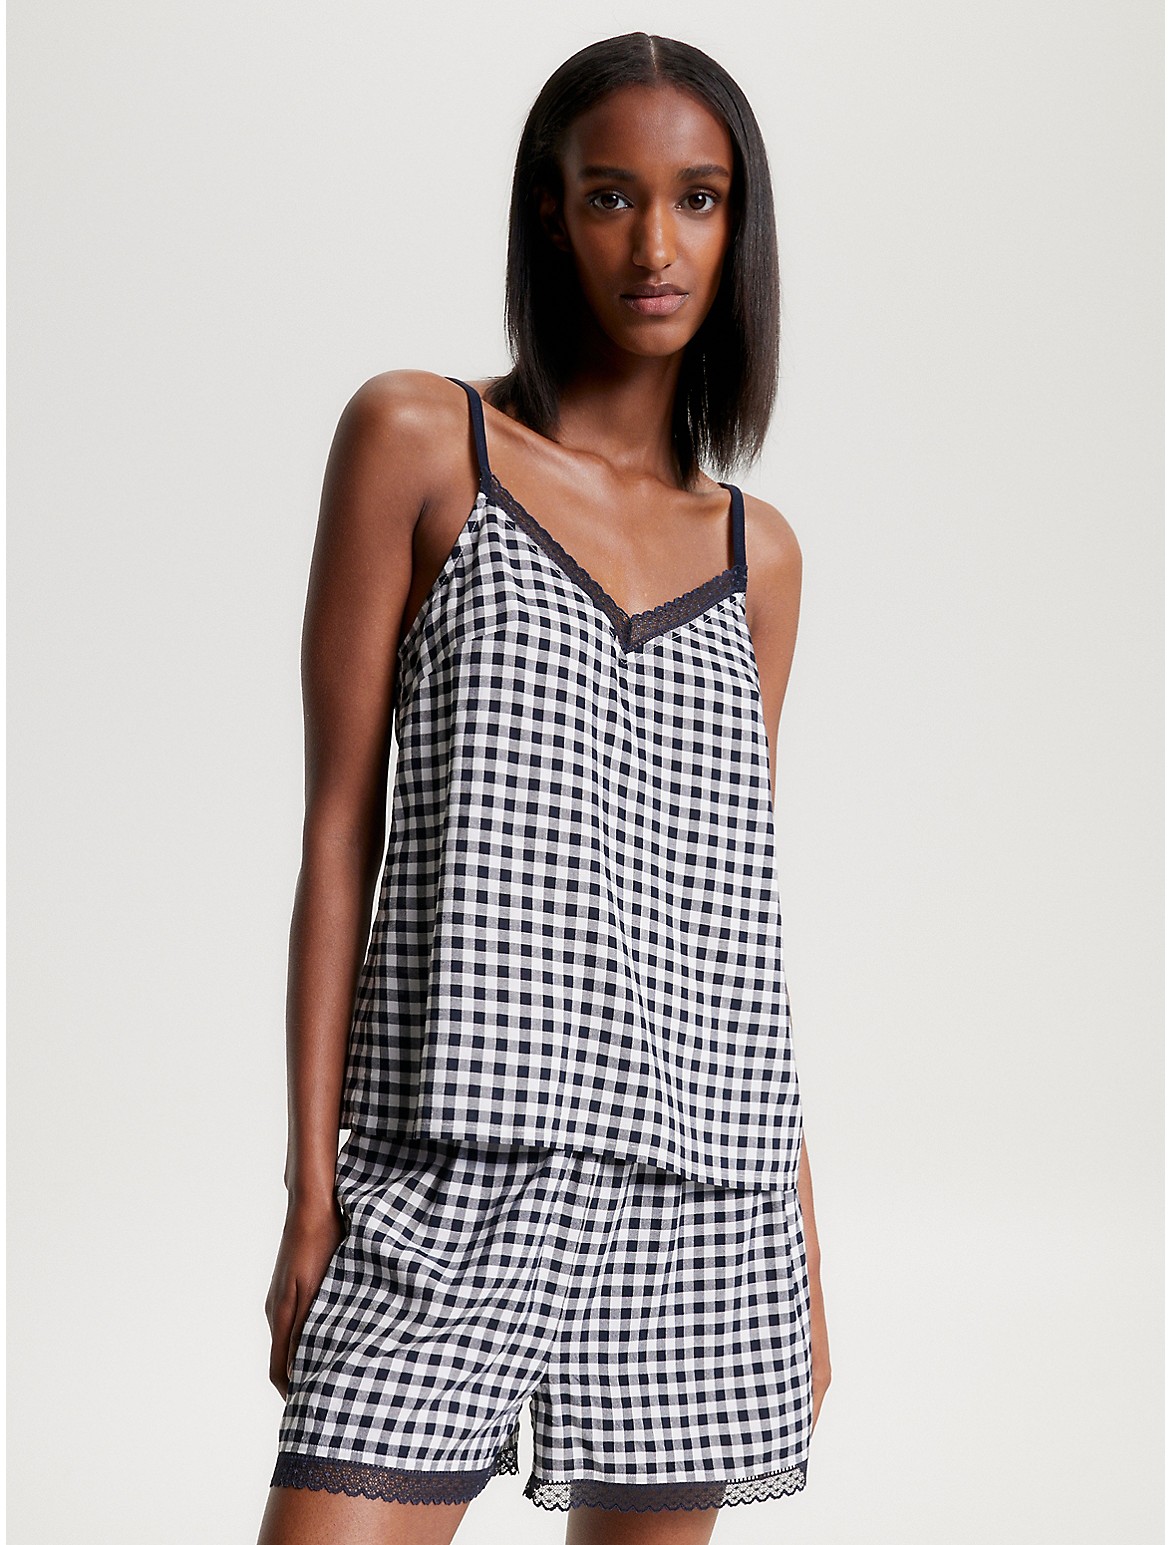 Tommy Hilfiger Women's Gingham Woven Cami - Blue - L